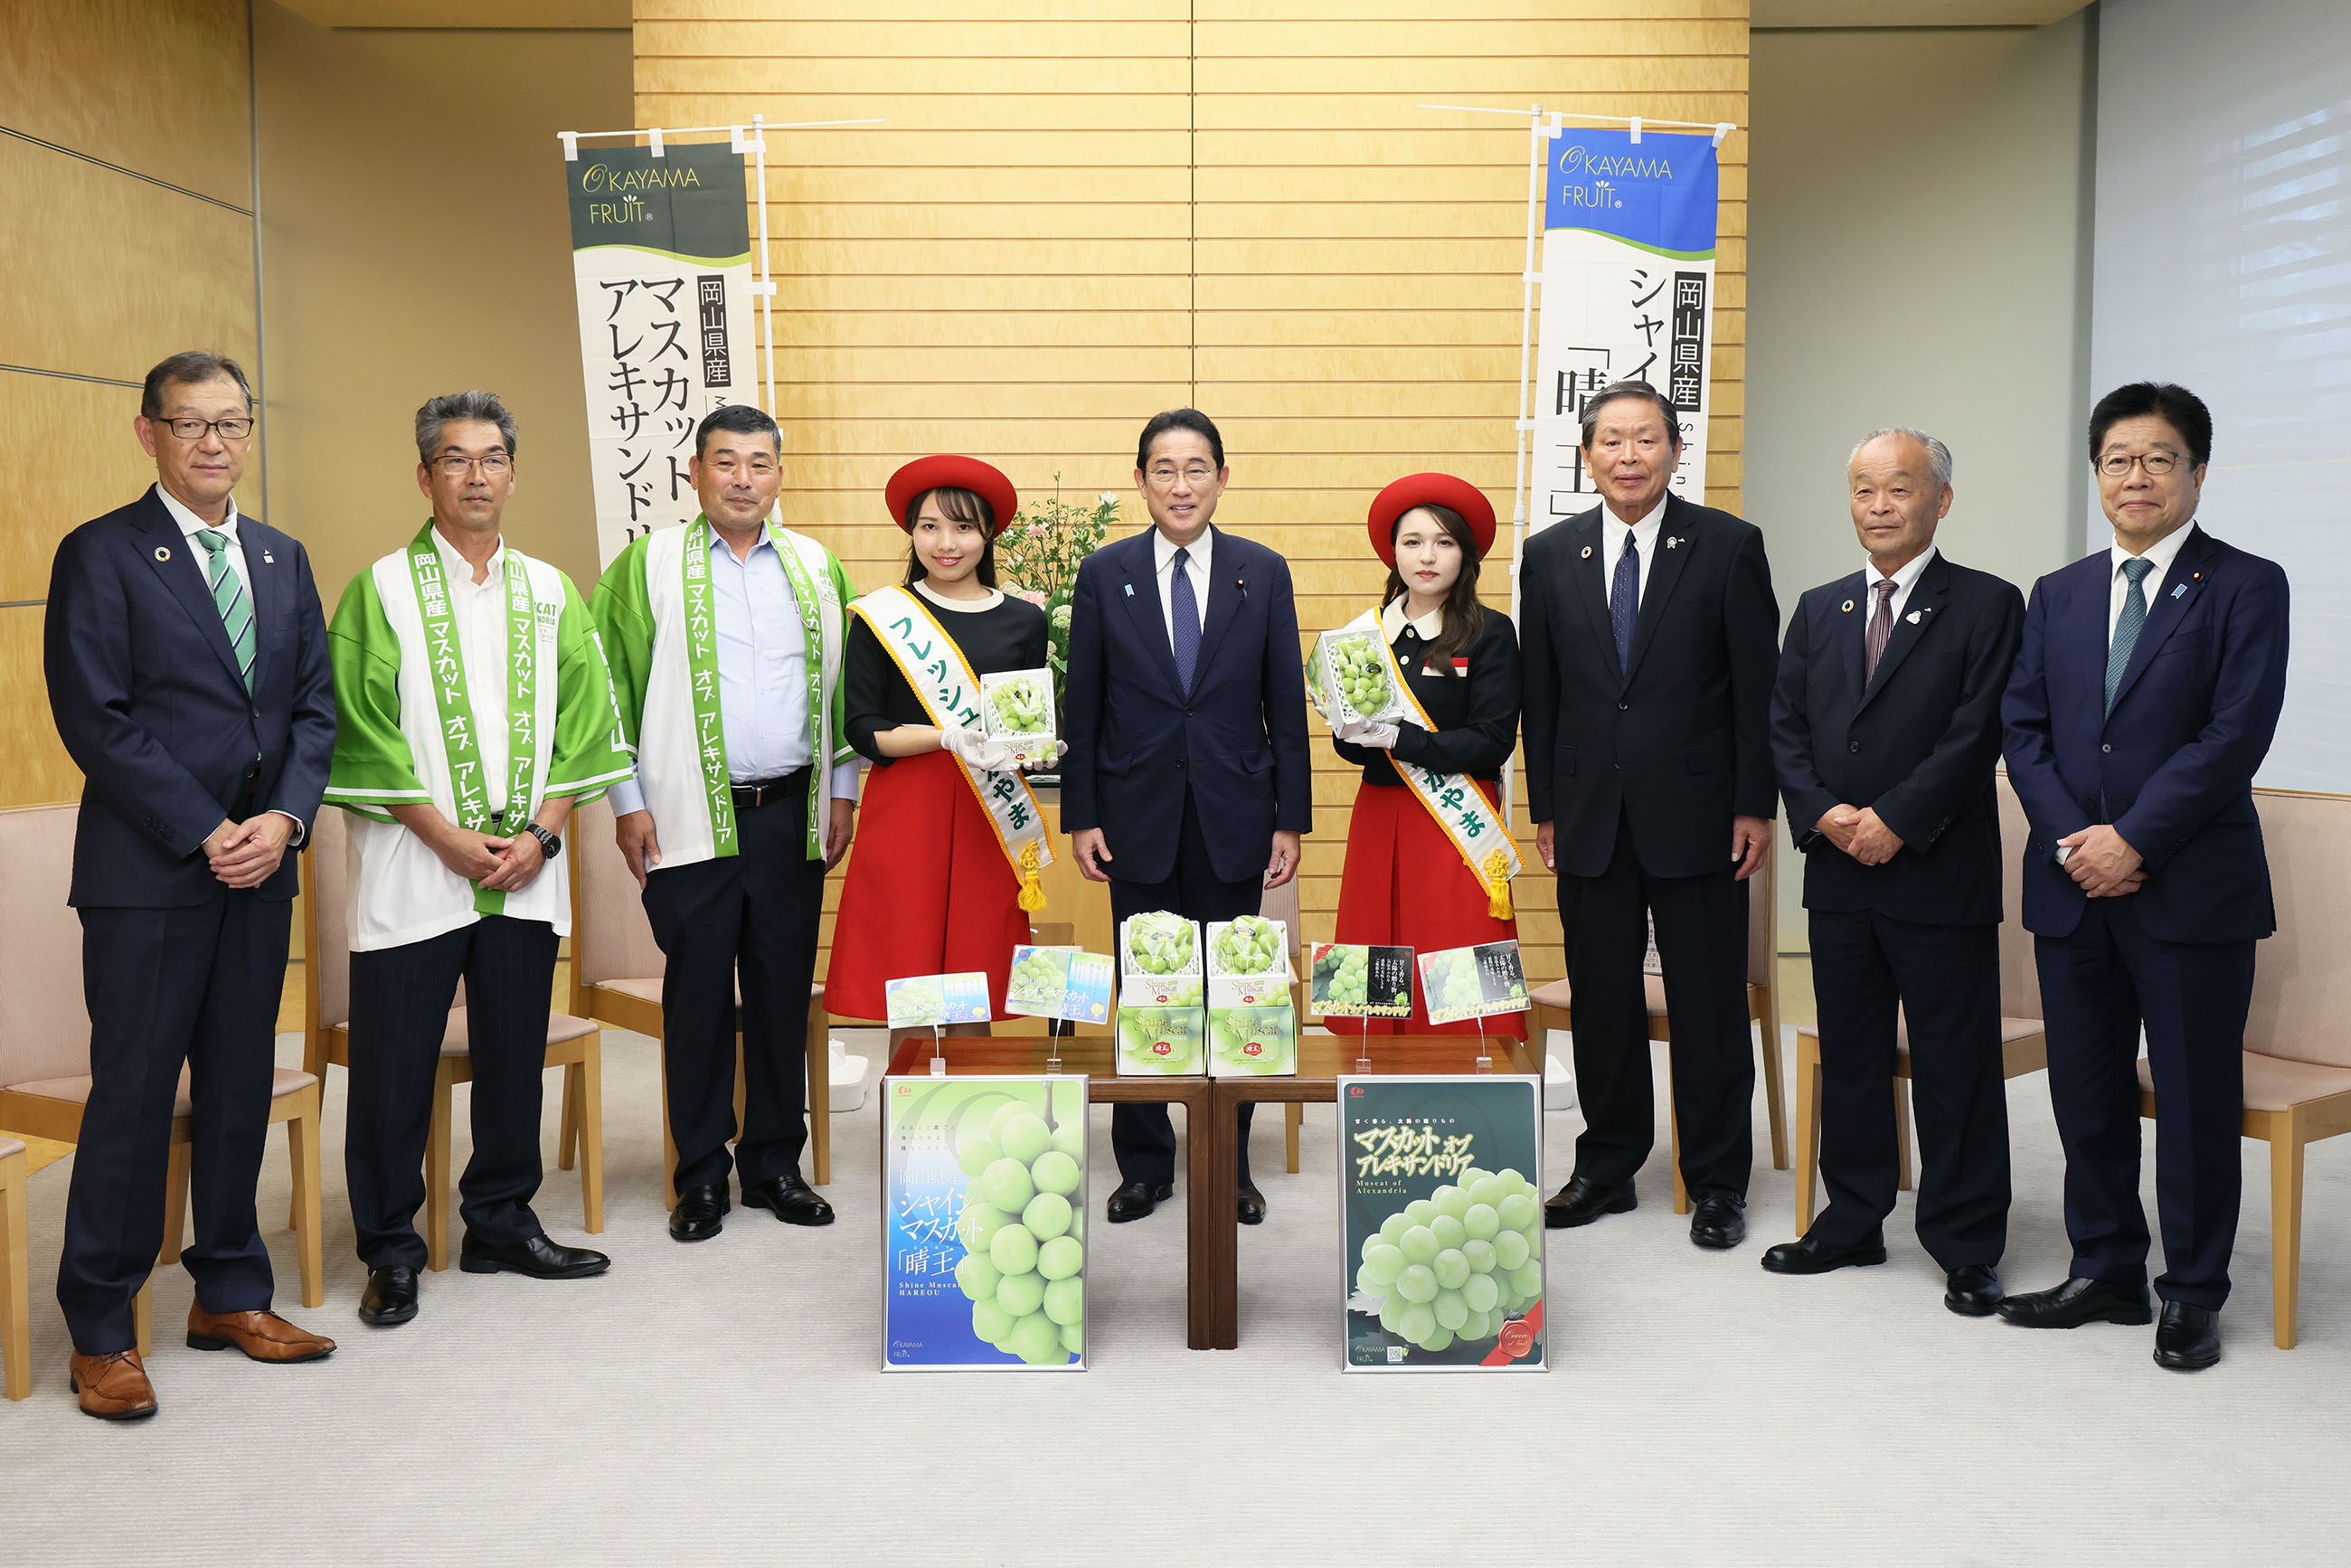 Prime Minister Kishida being presented with Shine Muscat grapes (1)